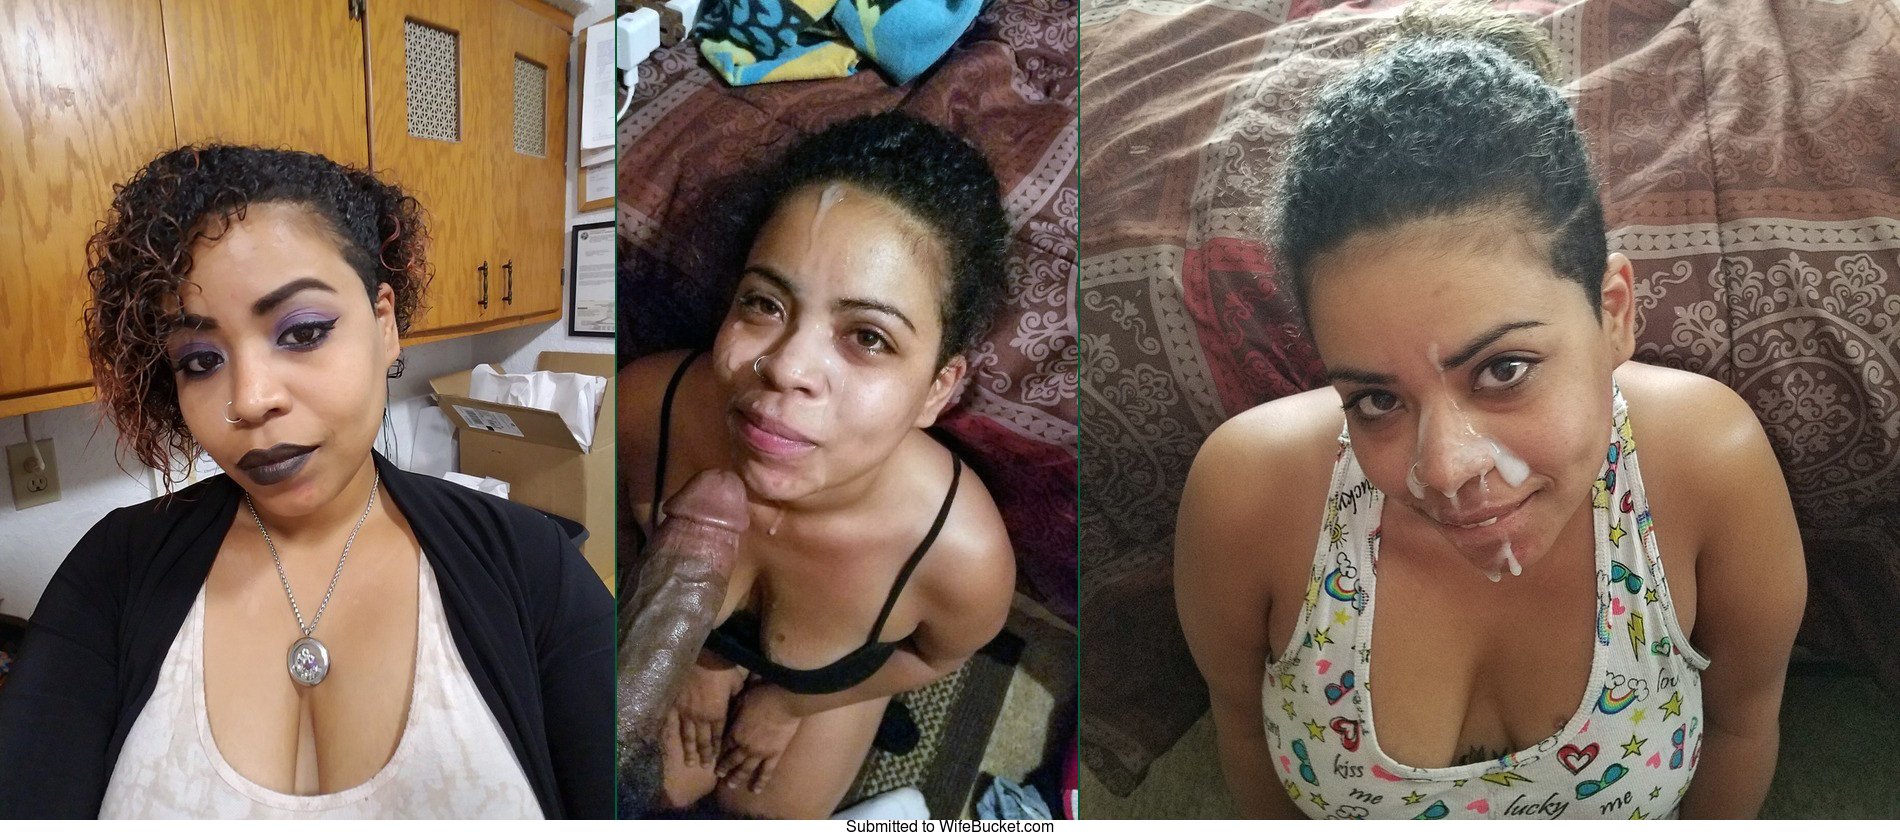 Homemade Facial Cumshot Before And After - 6 amateur pics before and after the facial cumshot! â€“ WifeBucket | Offical  MILF Blog